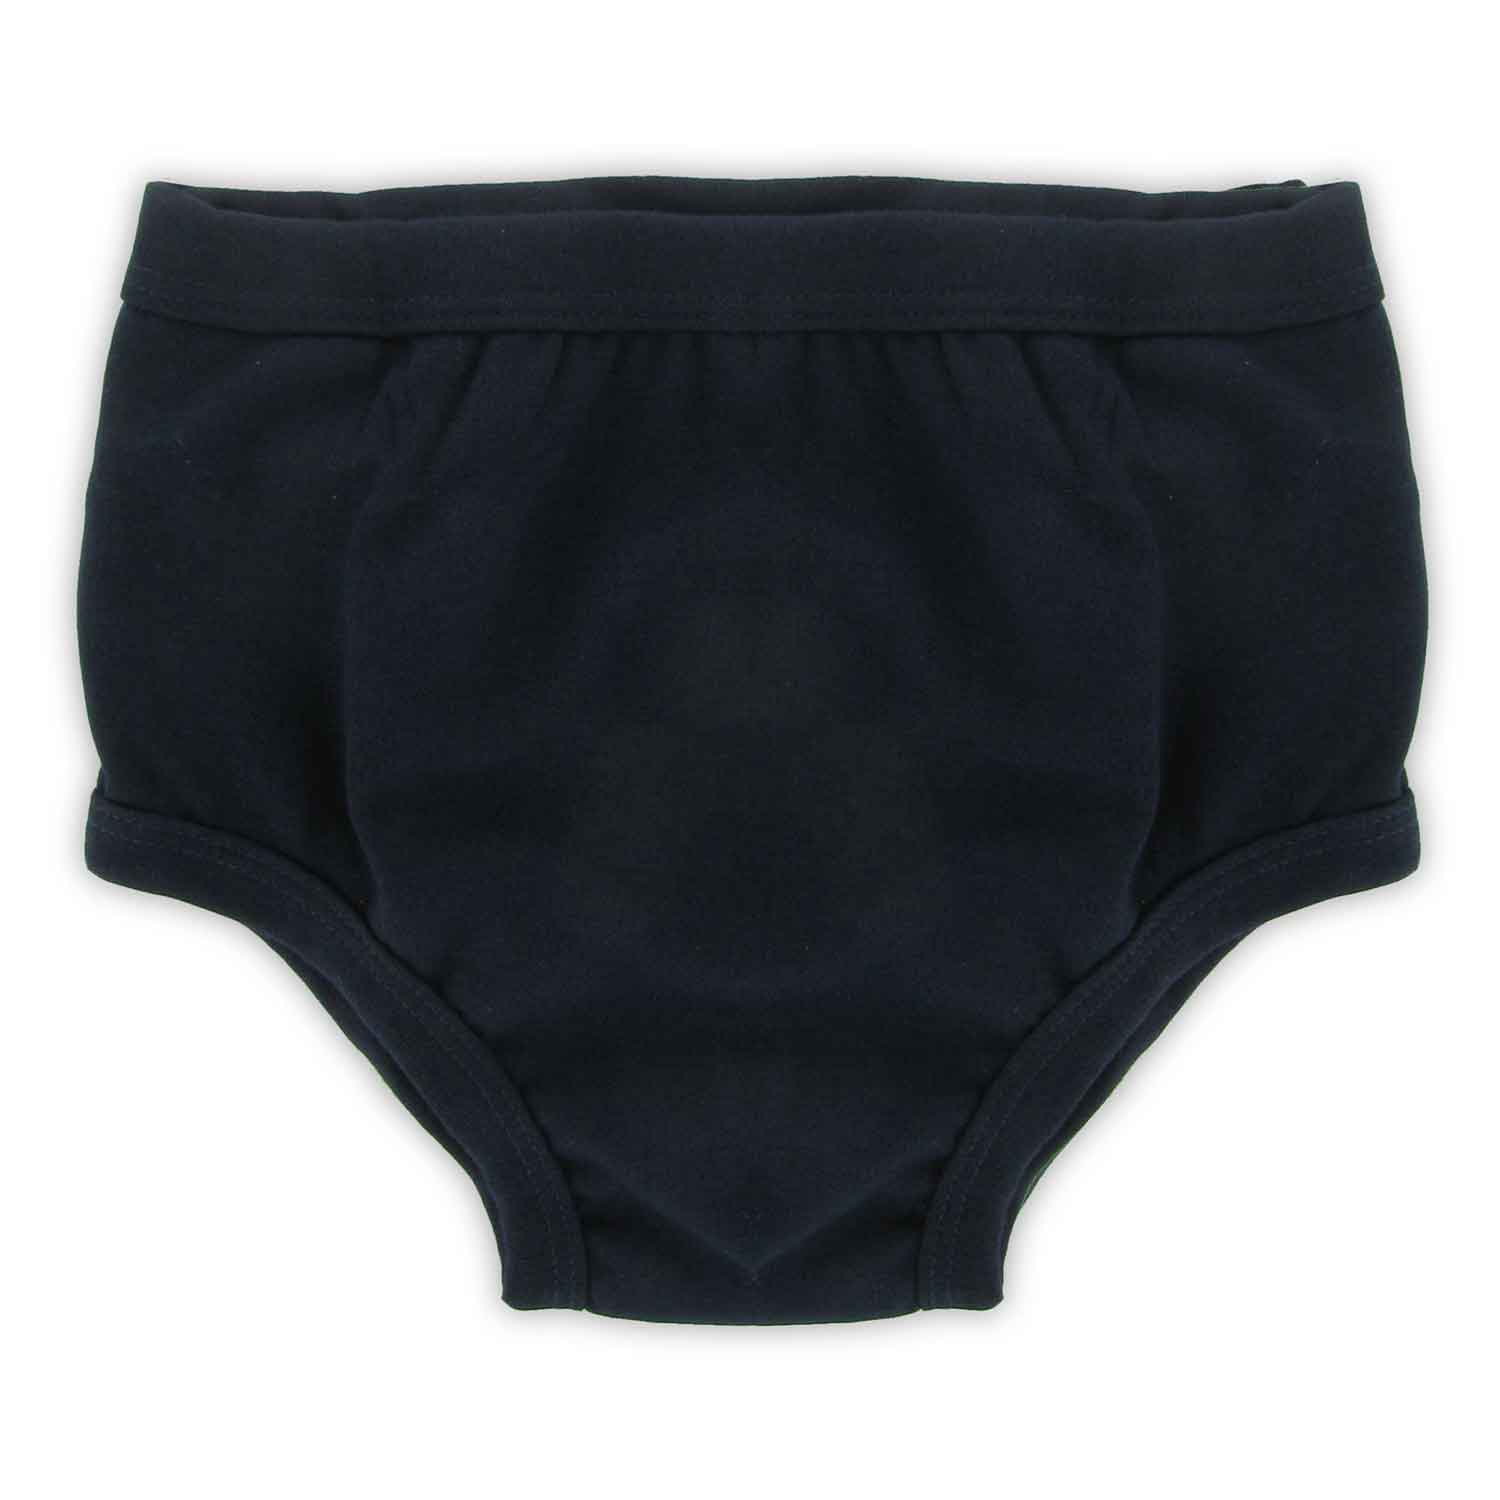 TIGER UNDERWEAR - Just in time for school, Tiger Plastic Pants are